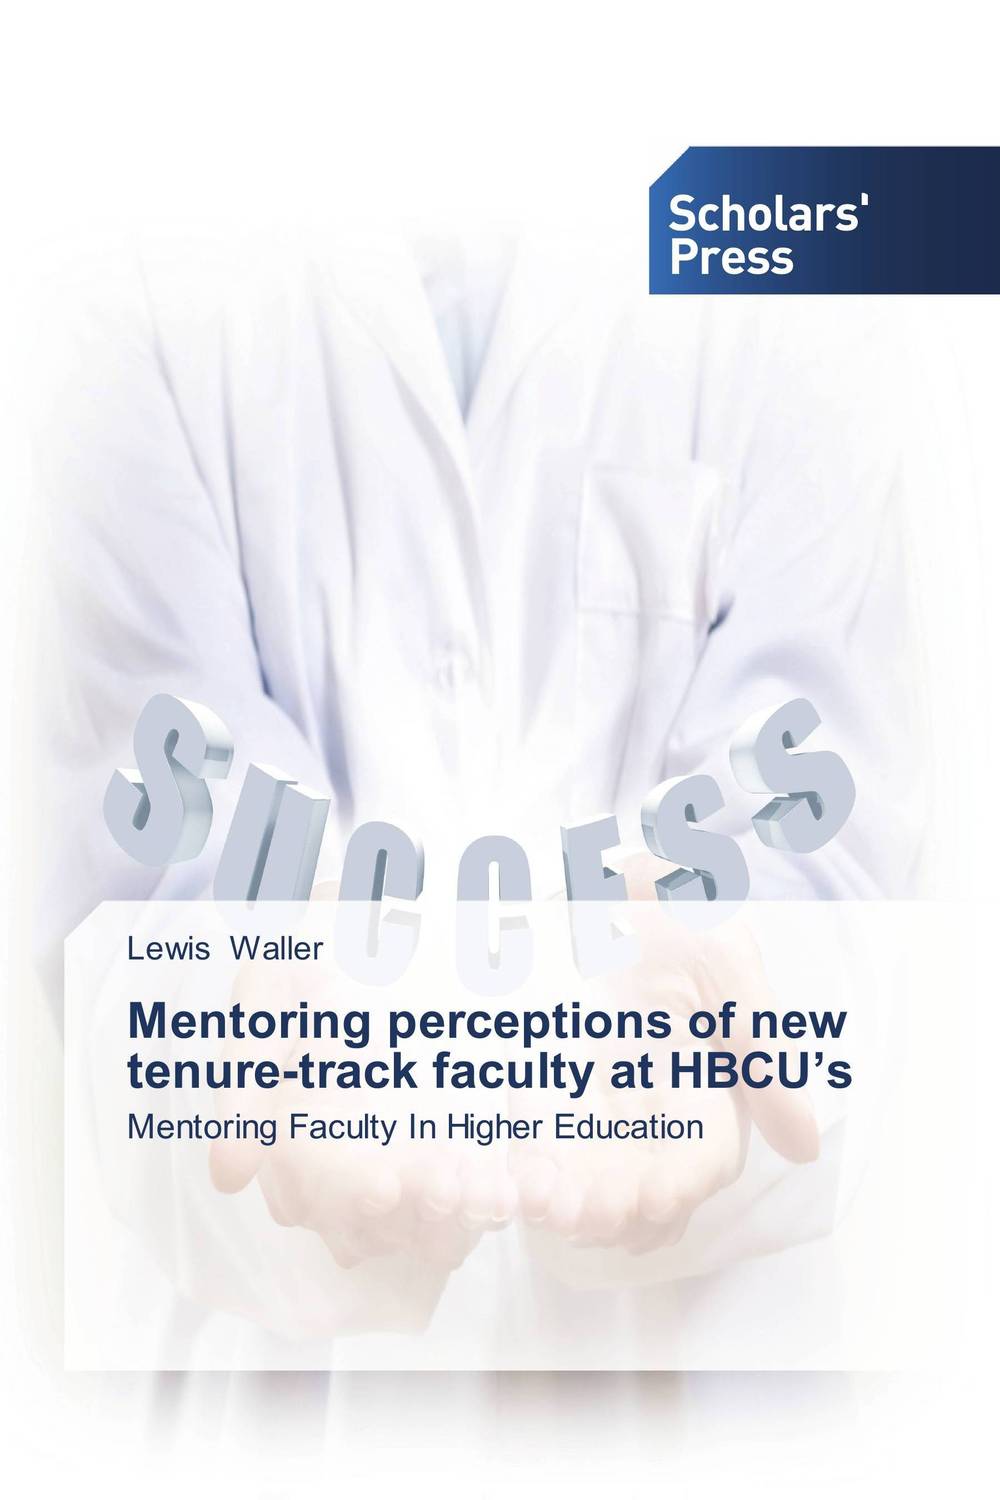 Mentoring perceptions of new tenure-track faculty at HBCU’s